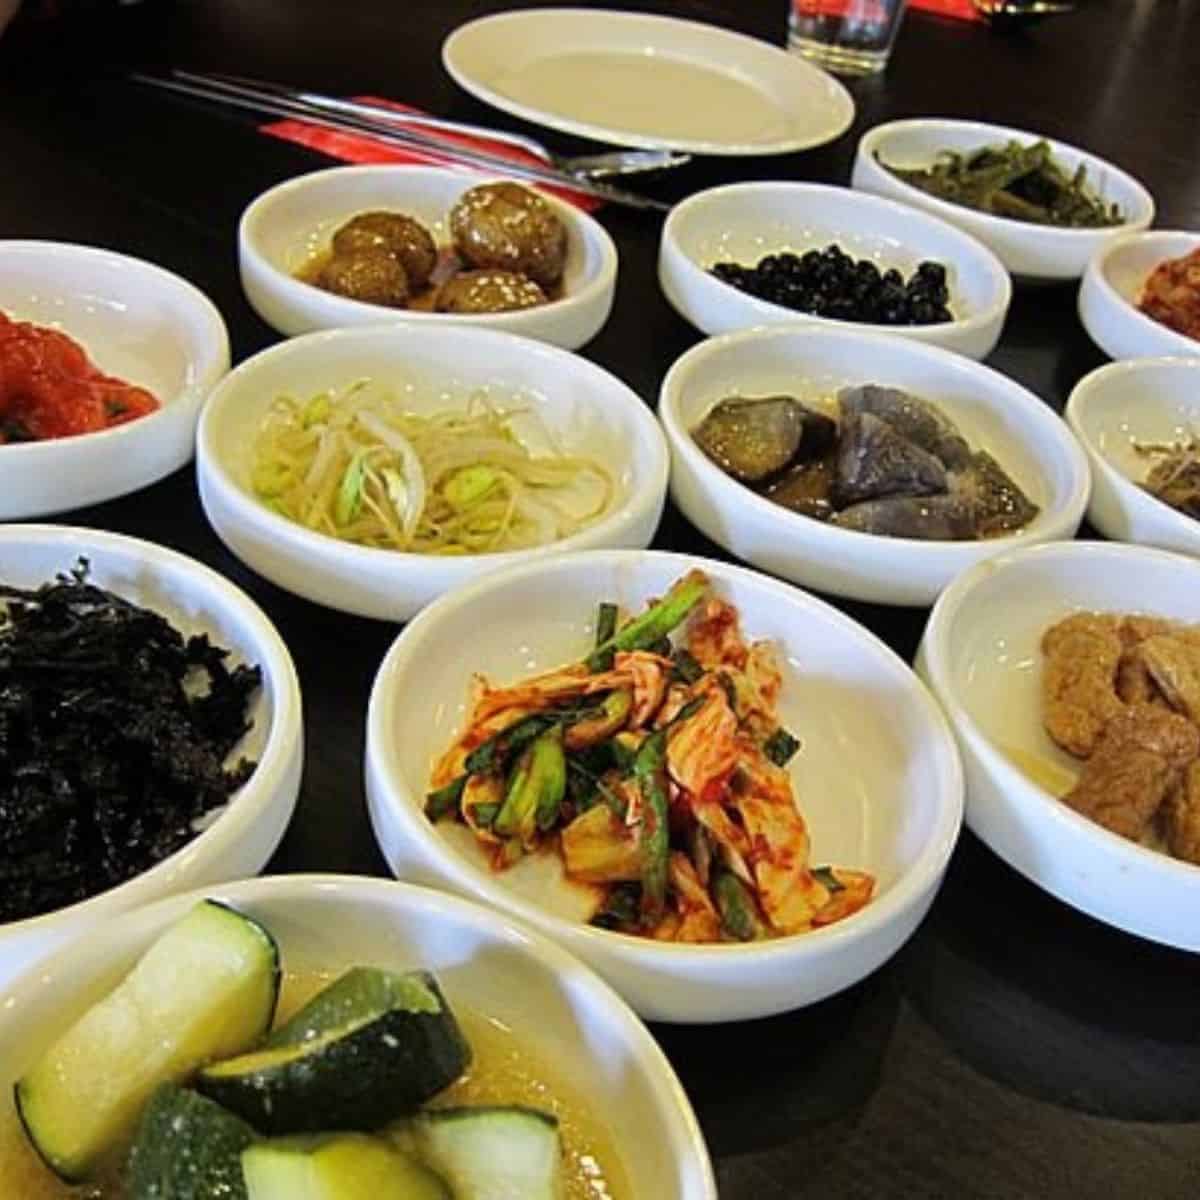 Kims family food side dishes